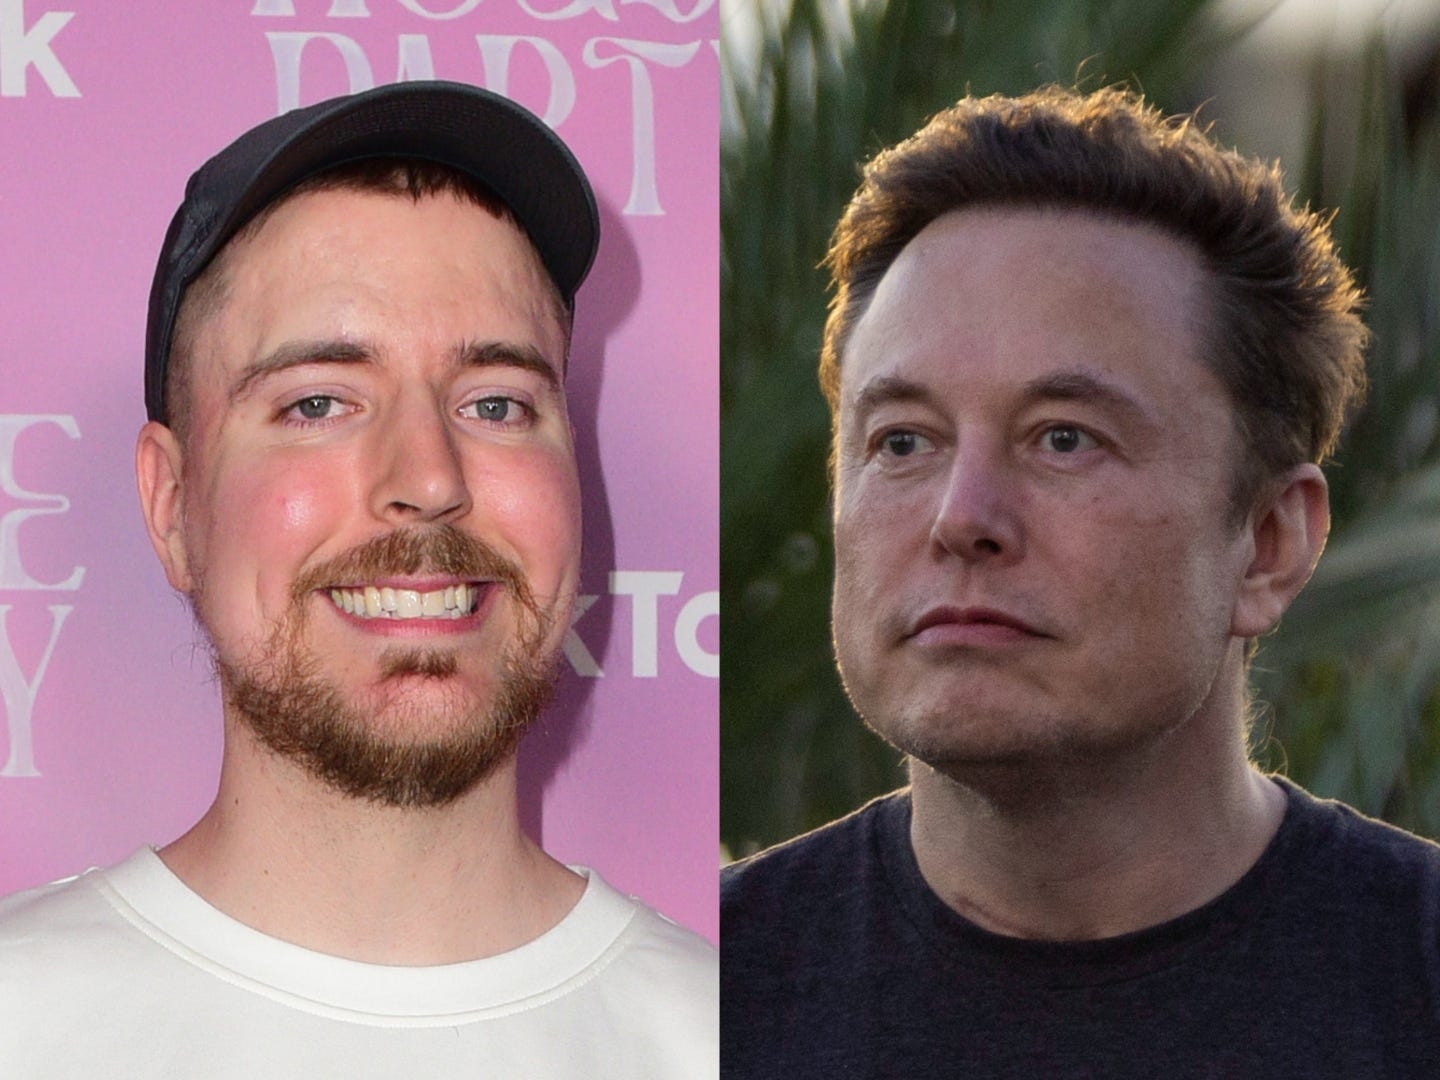 MrBeast told Elon Musk X can’t afford to pay for his videos – TweakTown